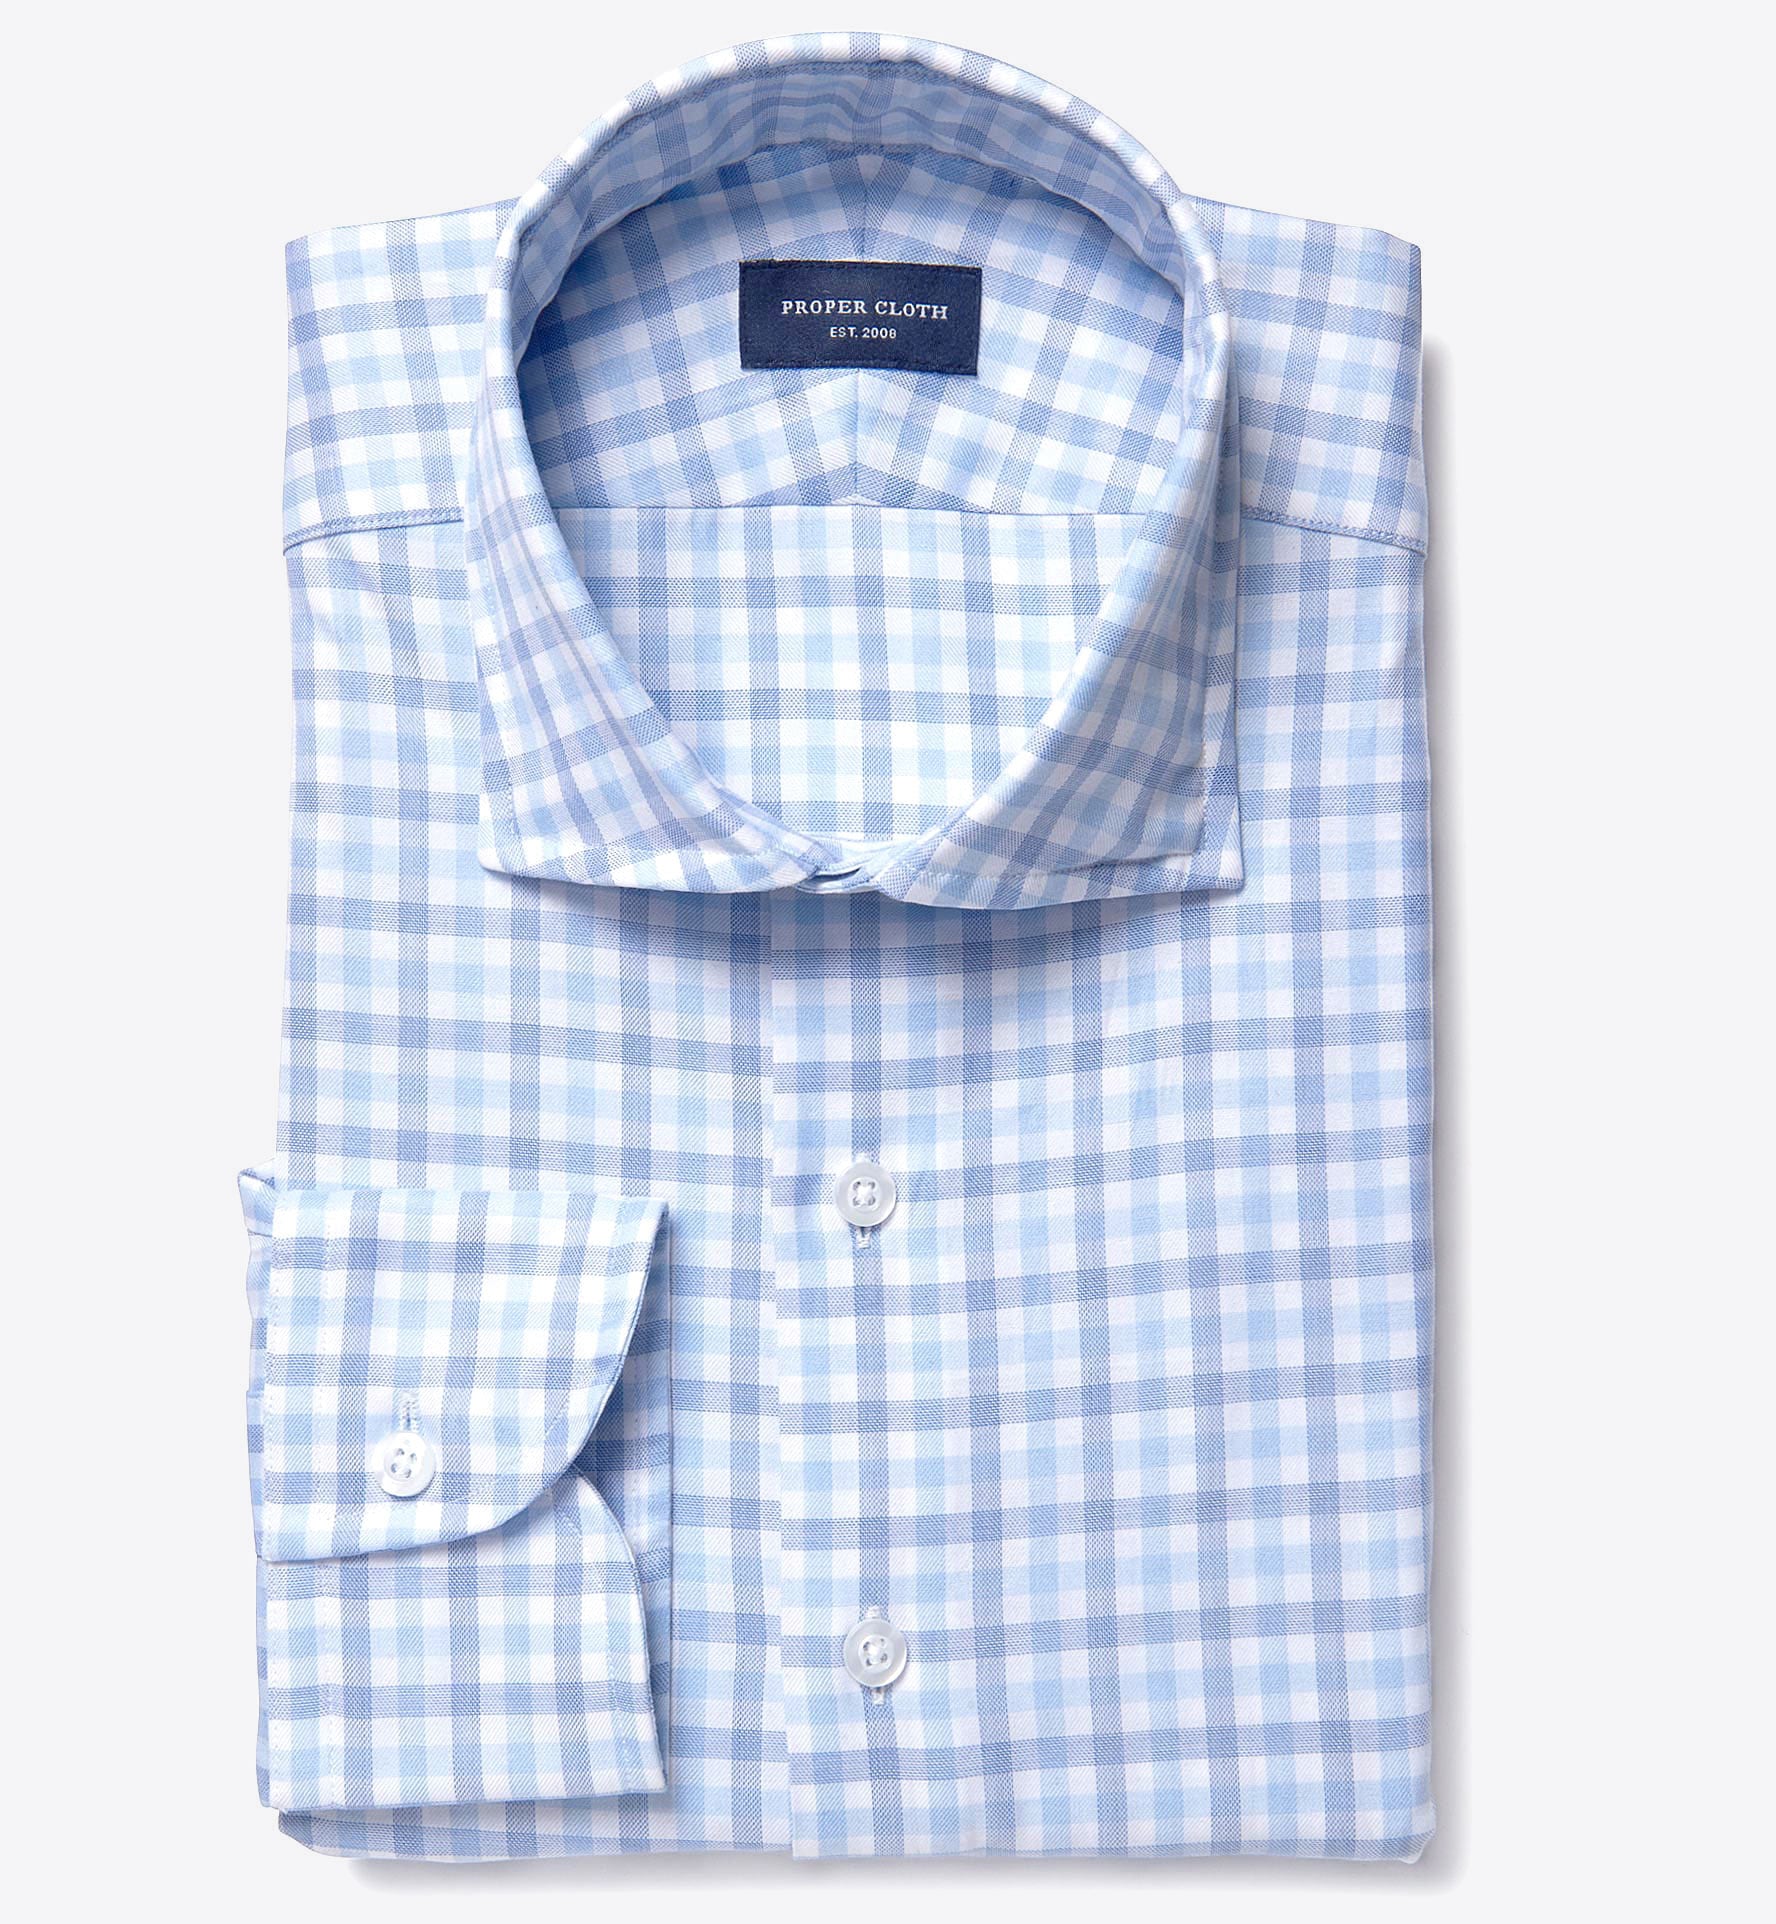 Lucca Blue Multi Gingham Fitted Dress Shirt by Proper Cloth